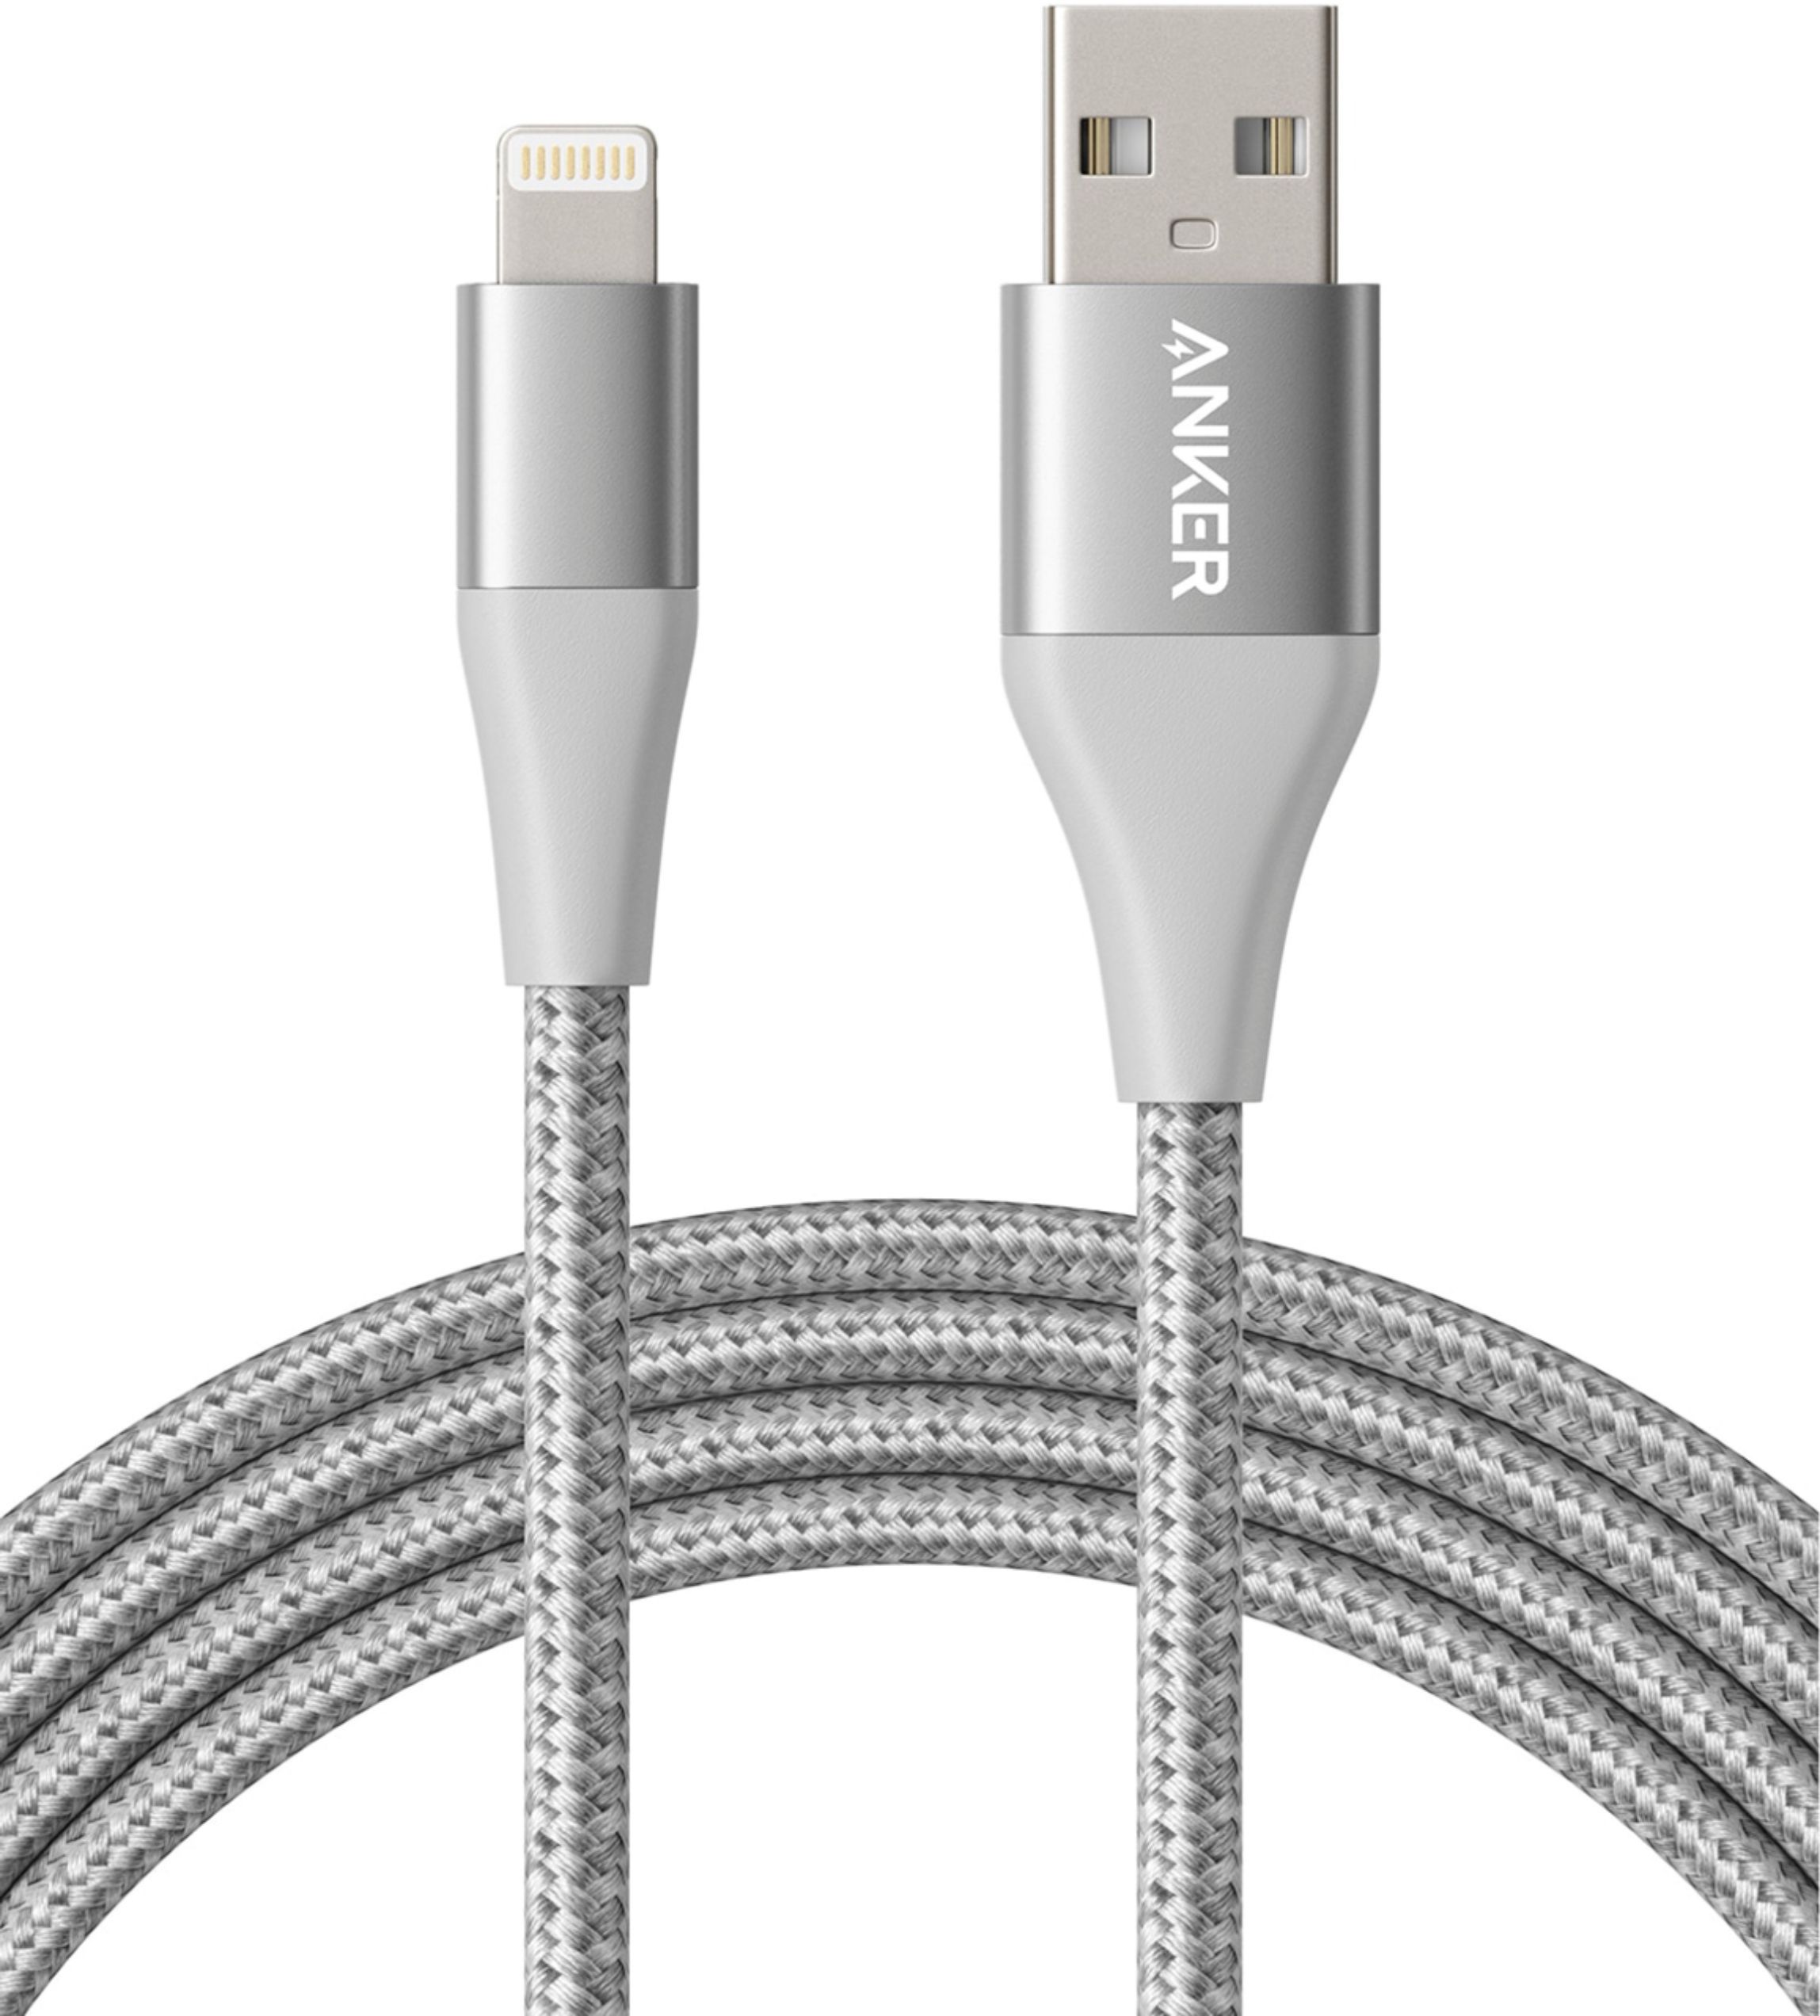 Powerline+ II USB-A to Lightning Cable Silver - Buy